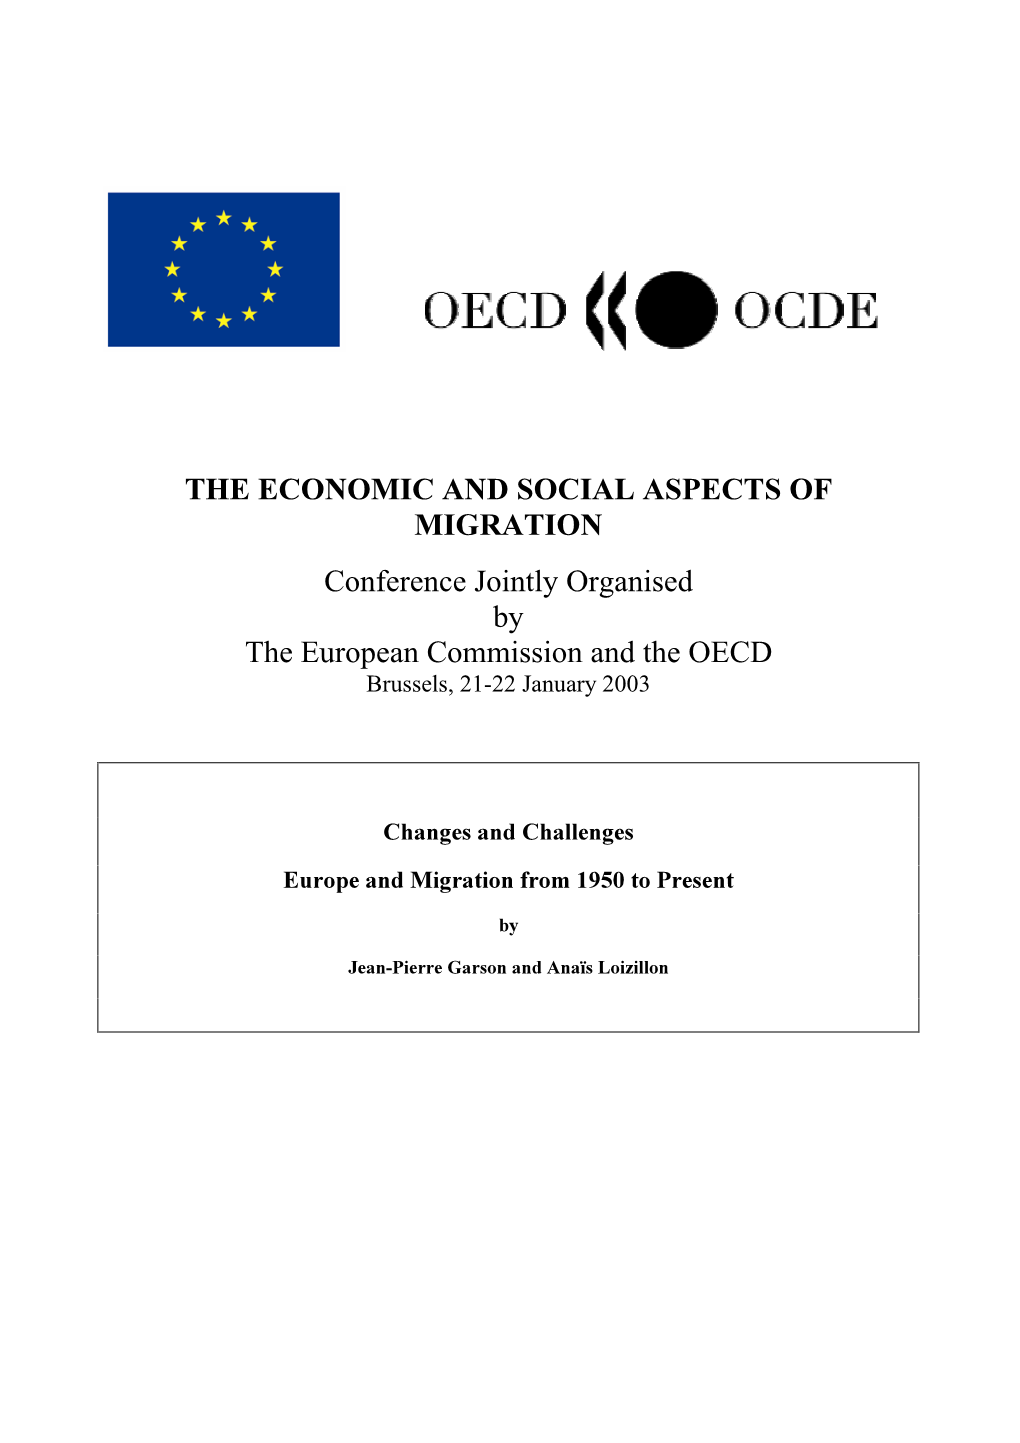 The Economic and Social Aspects of Migration